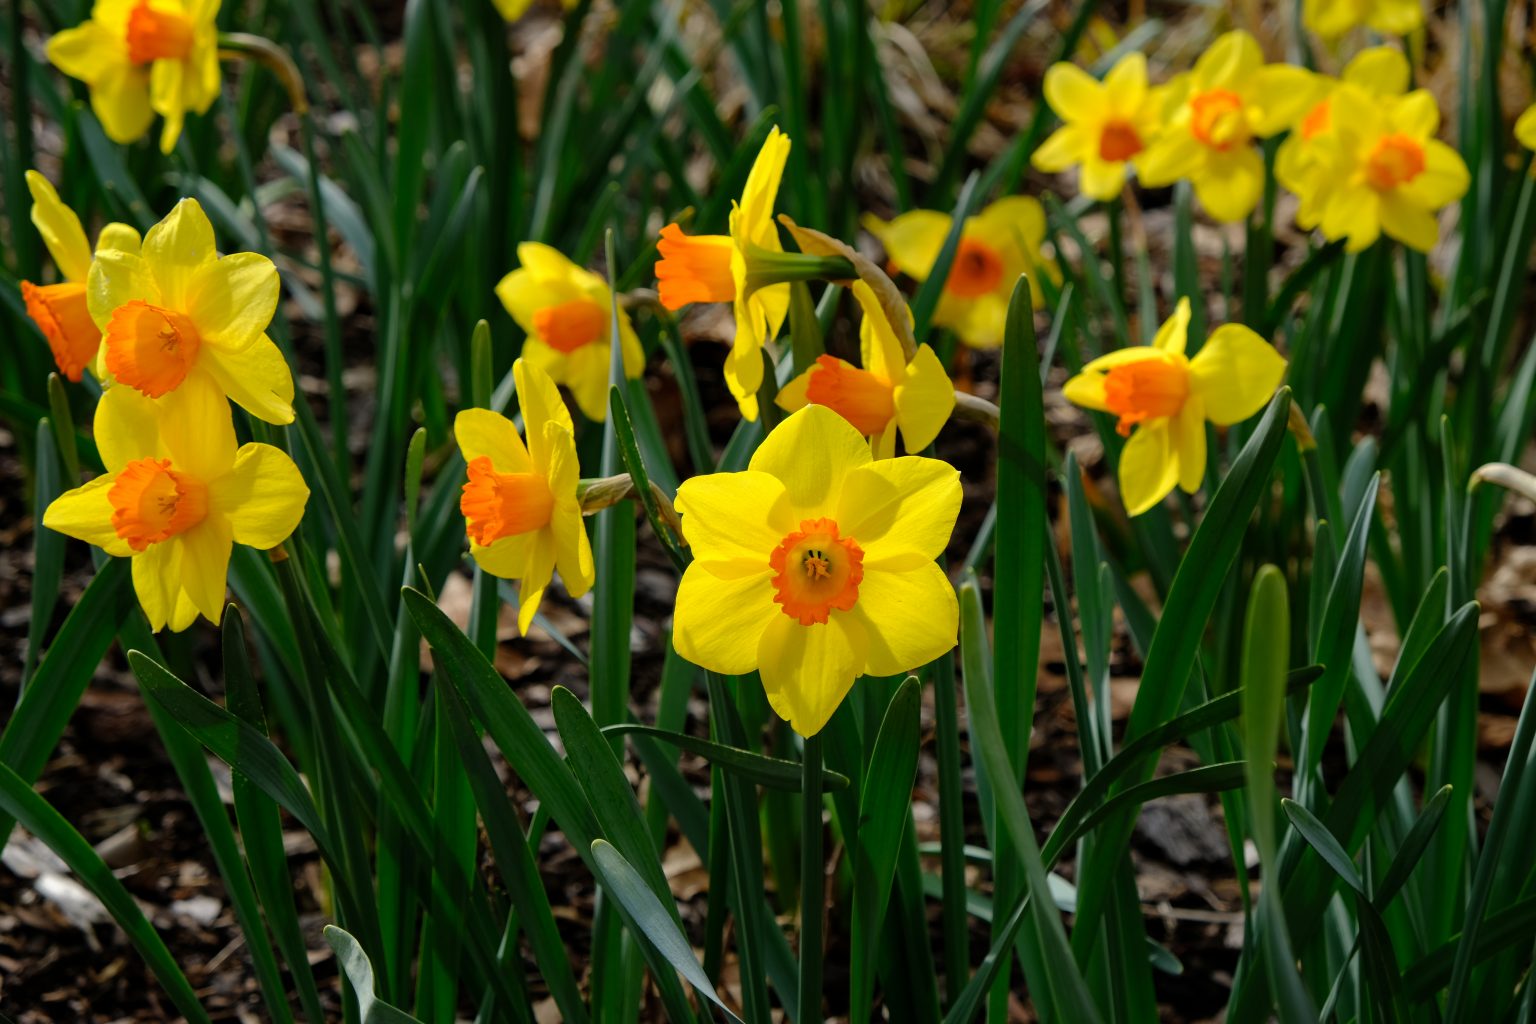 Narcissus-Daffodil-Pappy-George-1536x1024